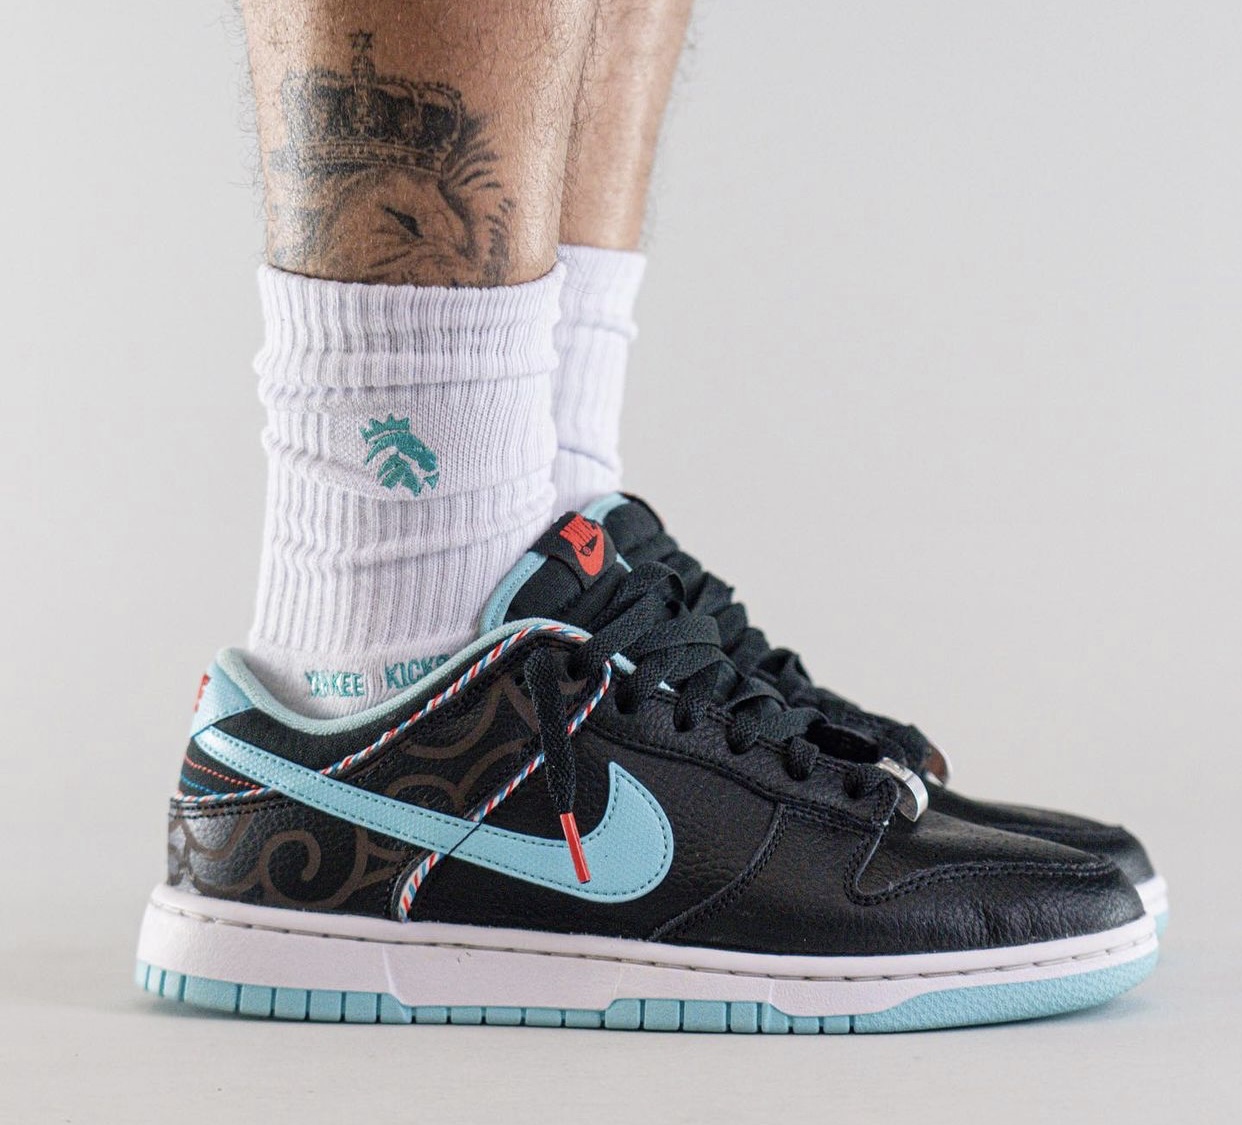 Nike Dunk Low Barber Shop DH7614-001 Release Date Info